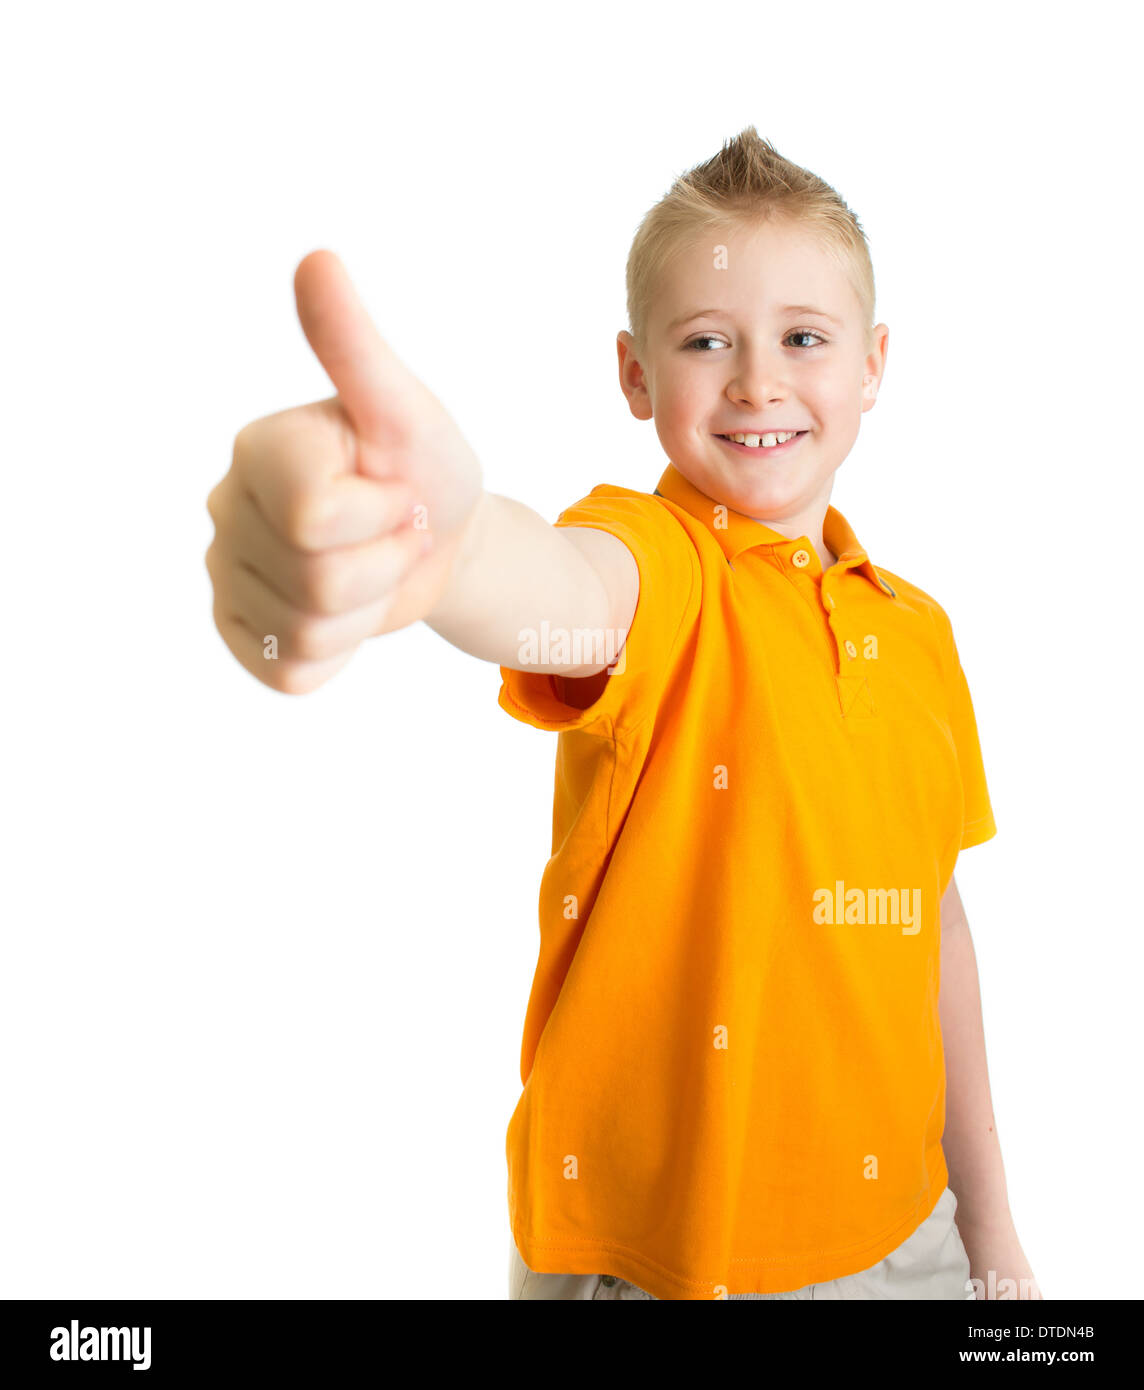 like gesture showing by kid Stock Photo